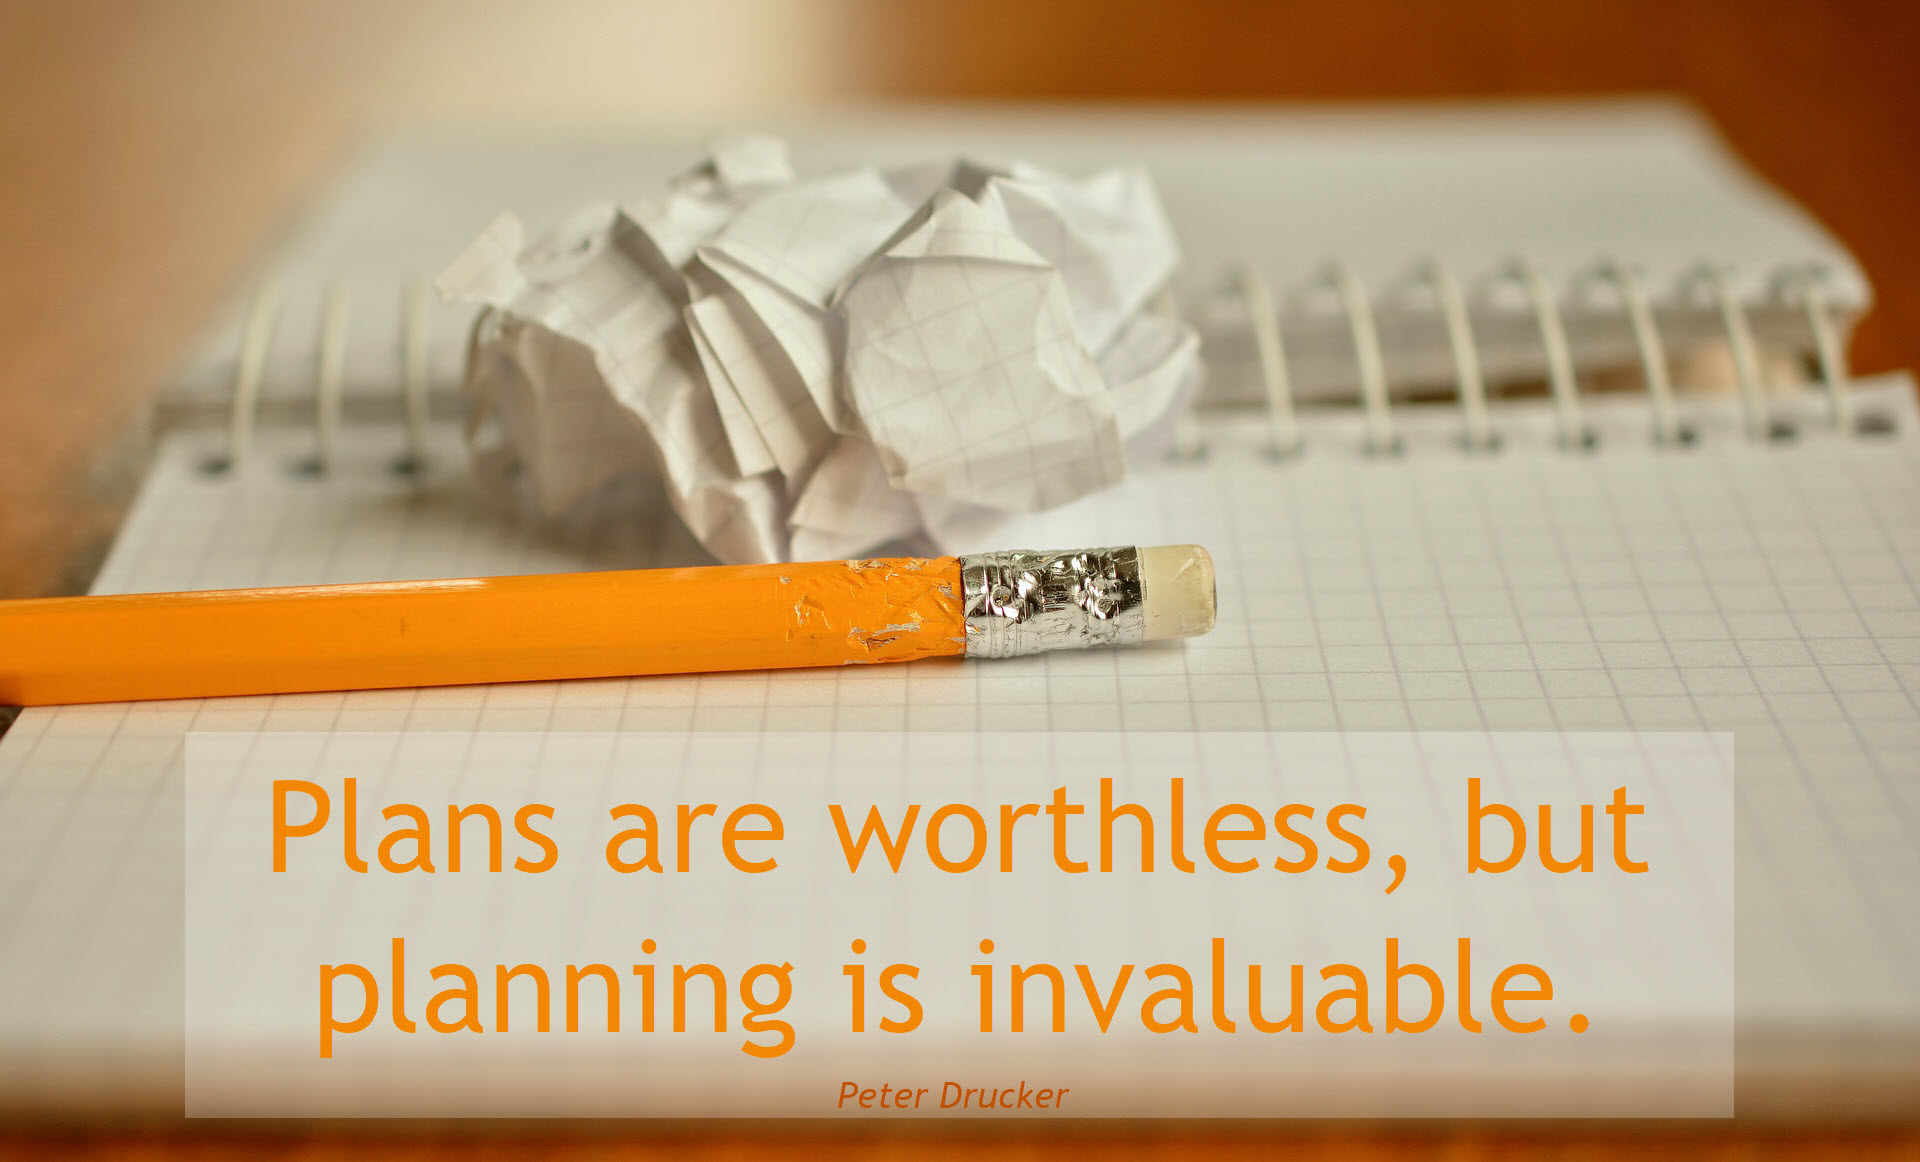 Graphic with text overlay that says - Plans are worthless, but planning in invaluable. Perter Druker.